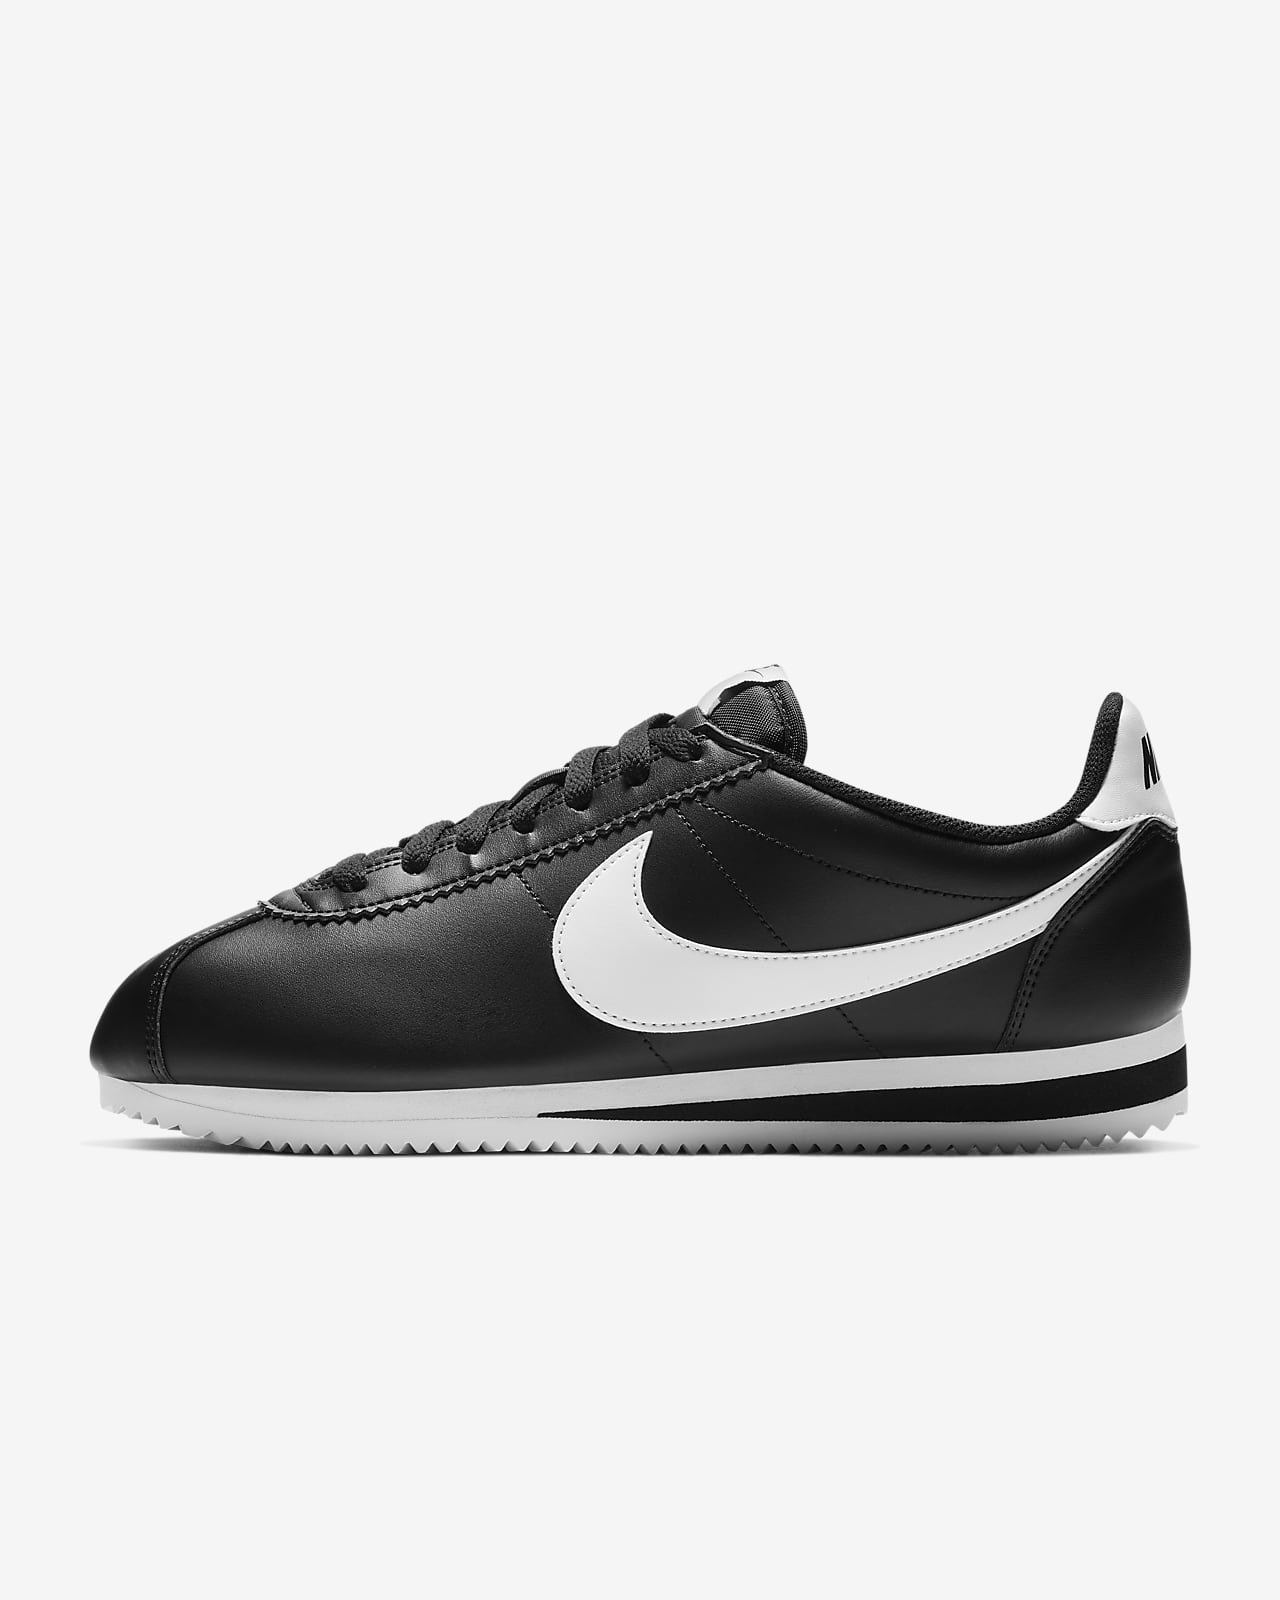 Nike Cortez Jp Flash Sales, UP TO 63% OFF | www